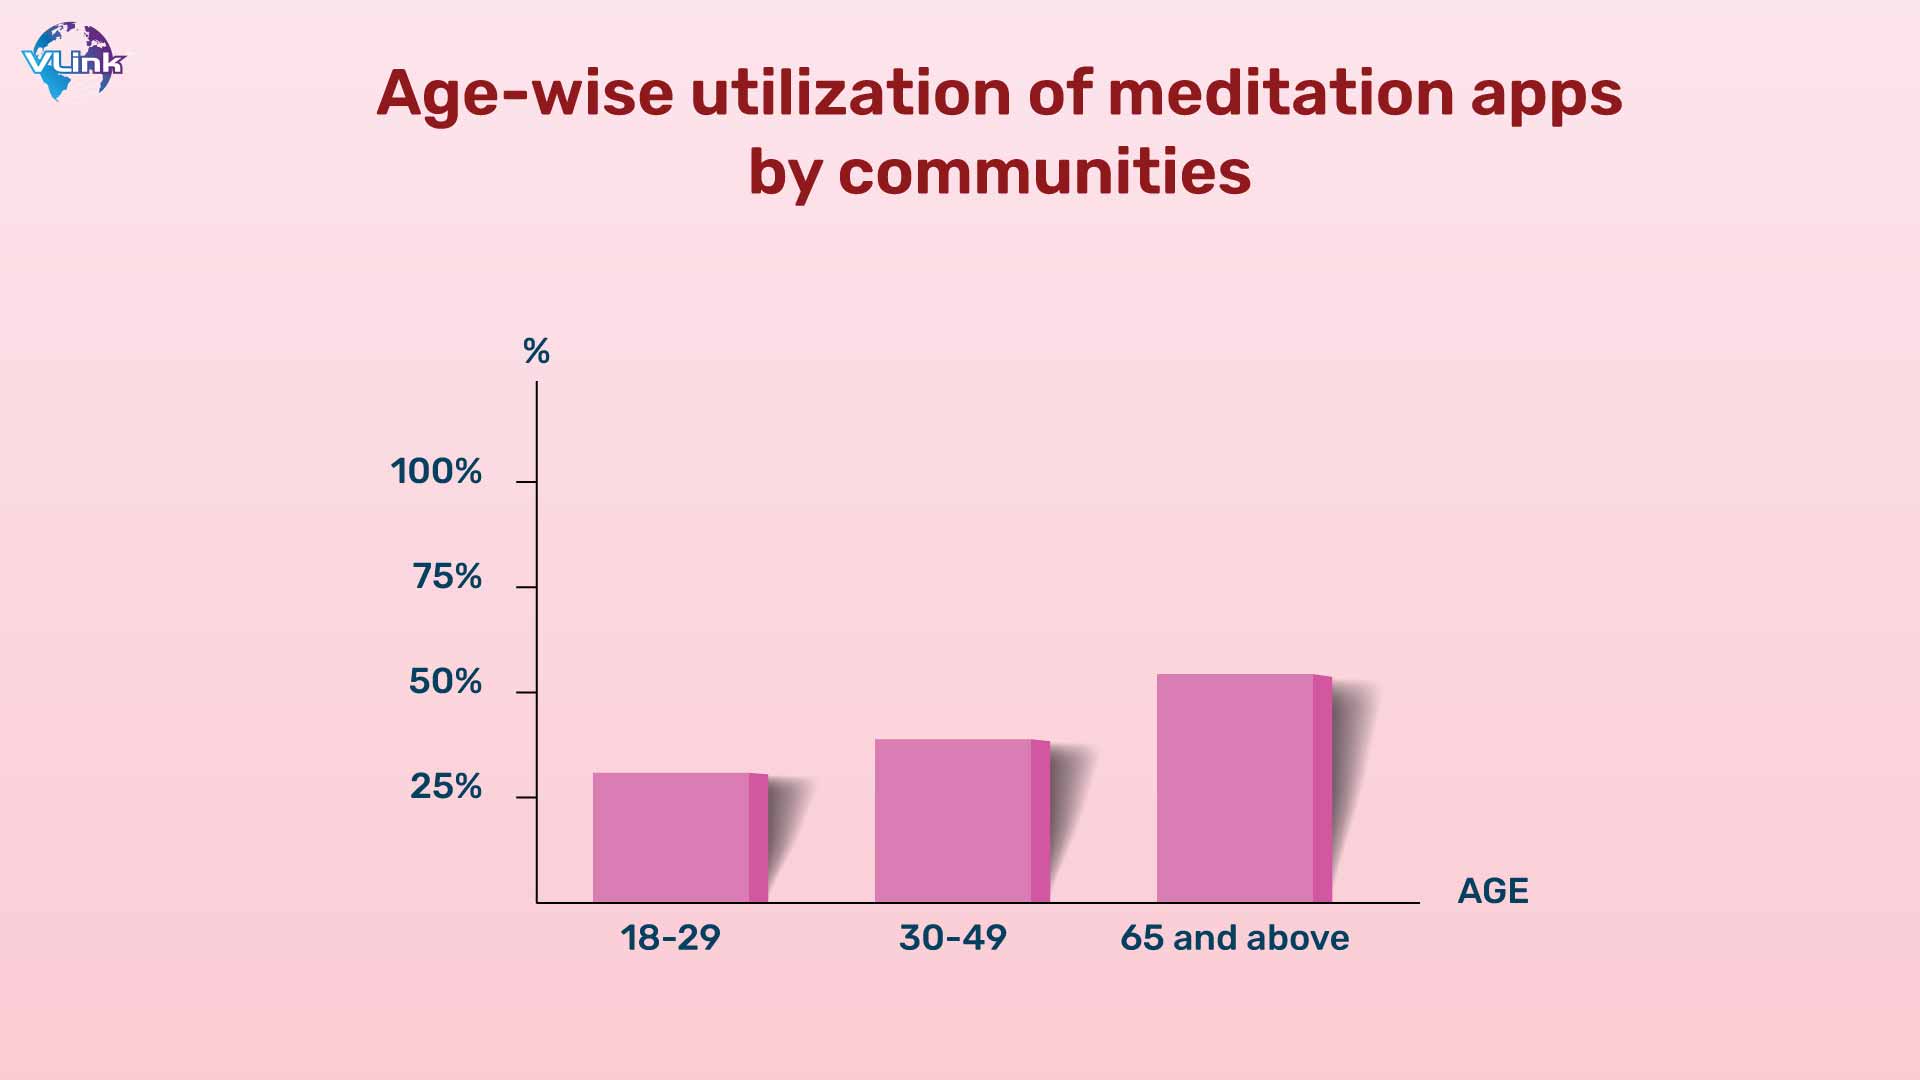  Age-wise utilization of meditation apps by communities